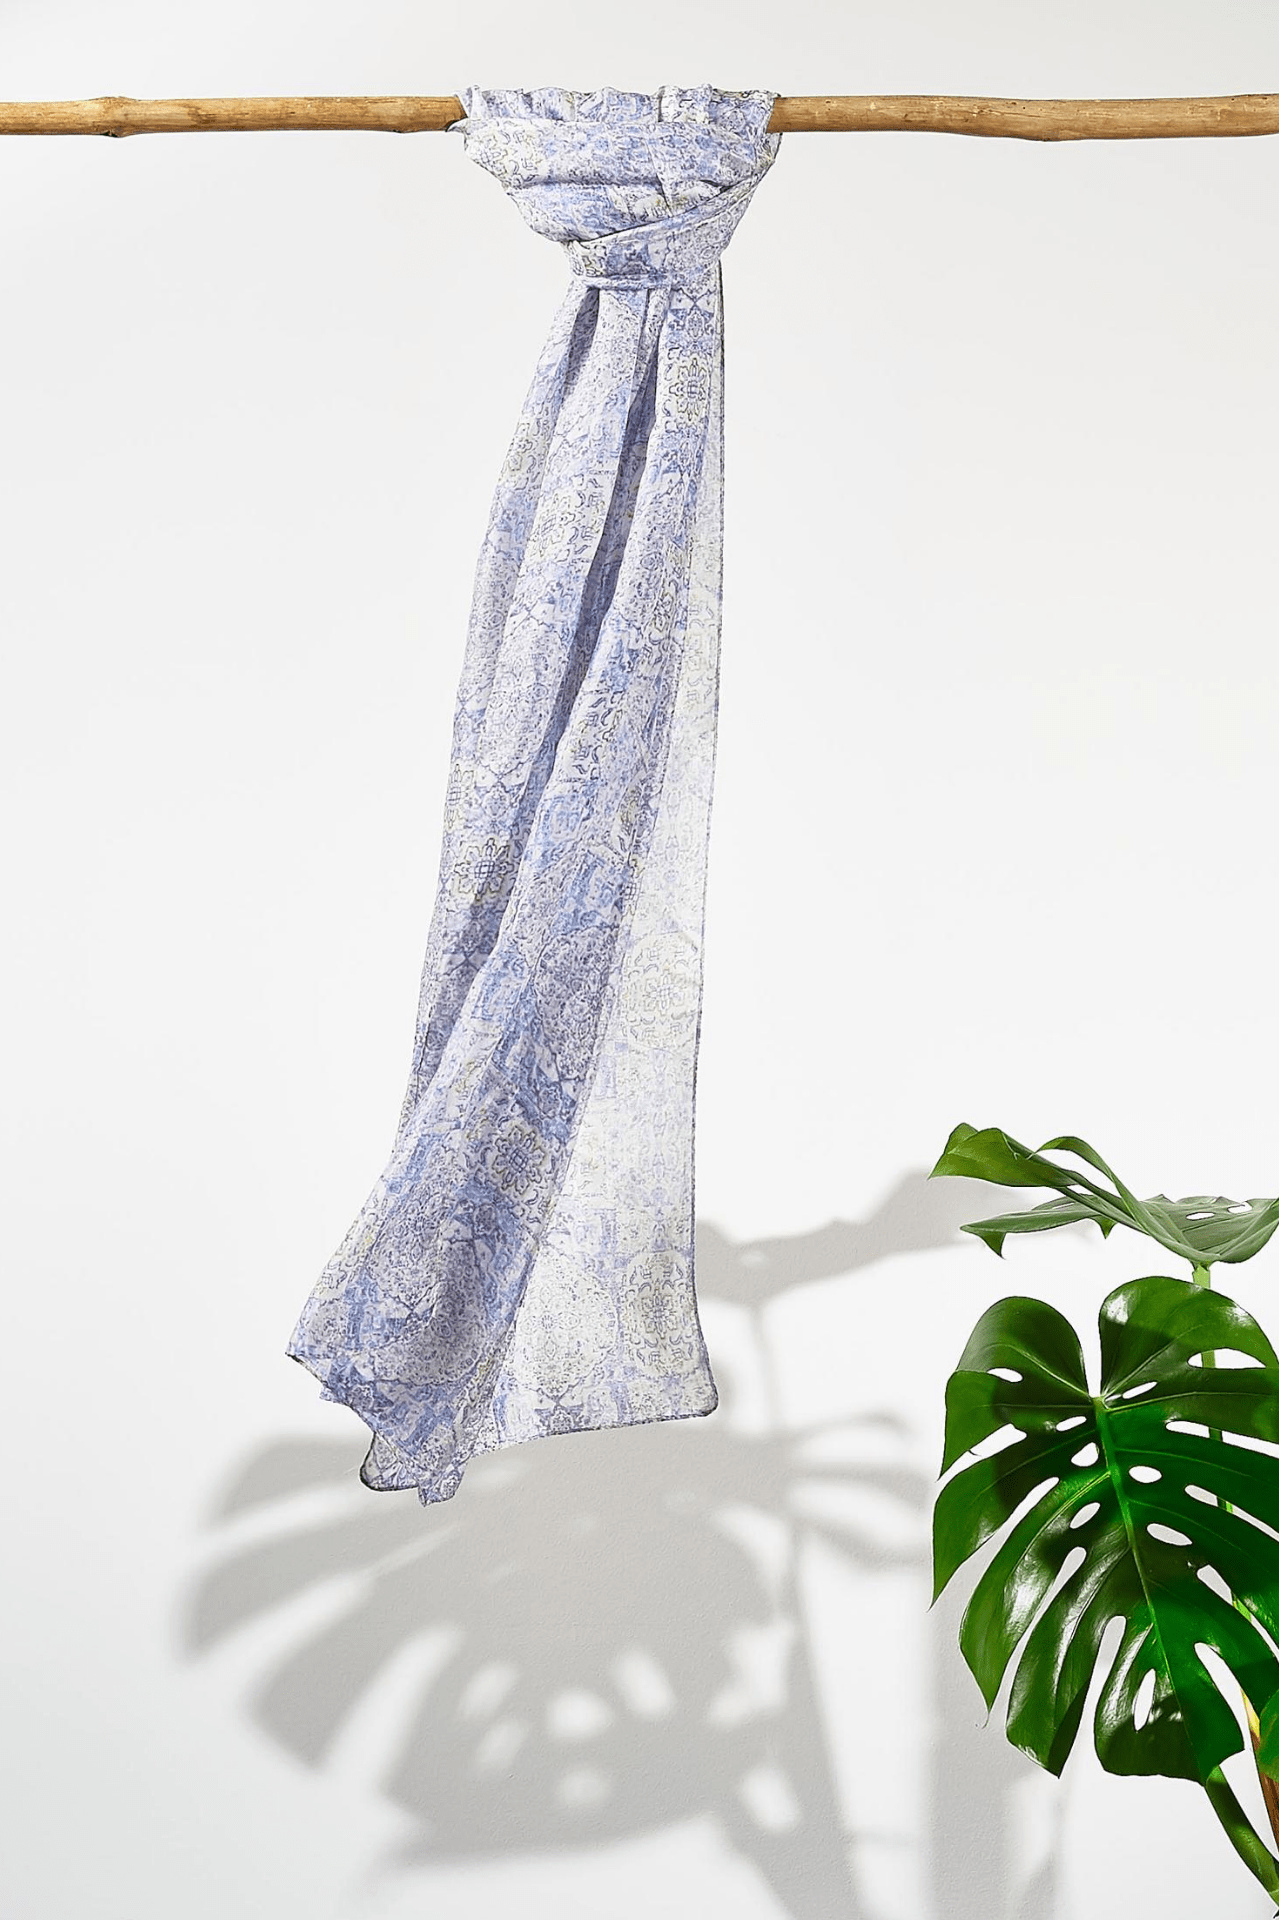 The blue mist moroccan silk scarf hanging from a rod. Showing how smooth the silk is as it hangs. The scarf is a pale sky blue with a dark blue busy pattern on it